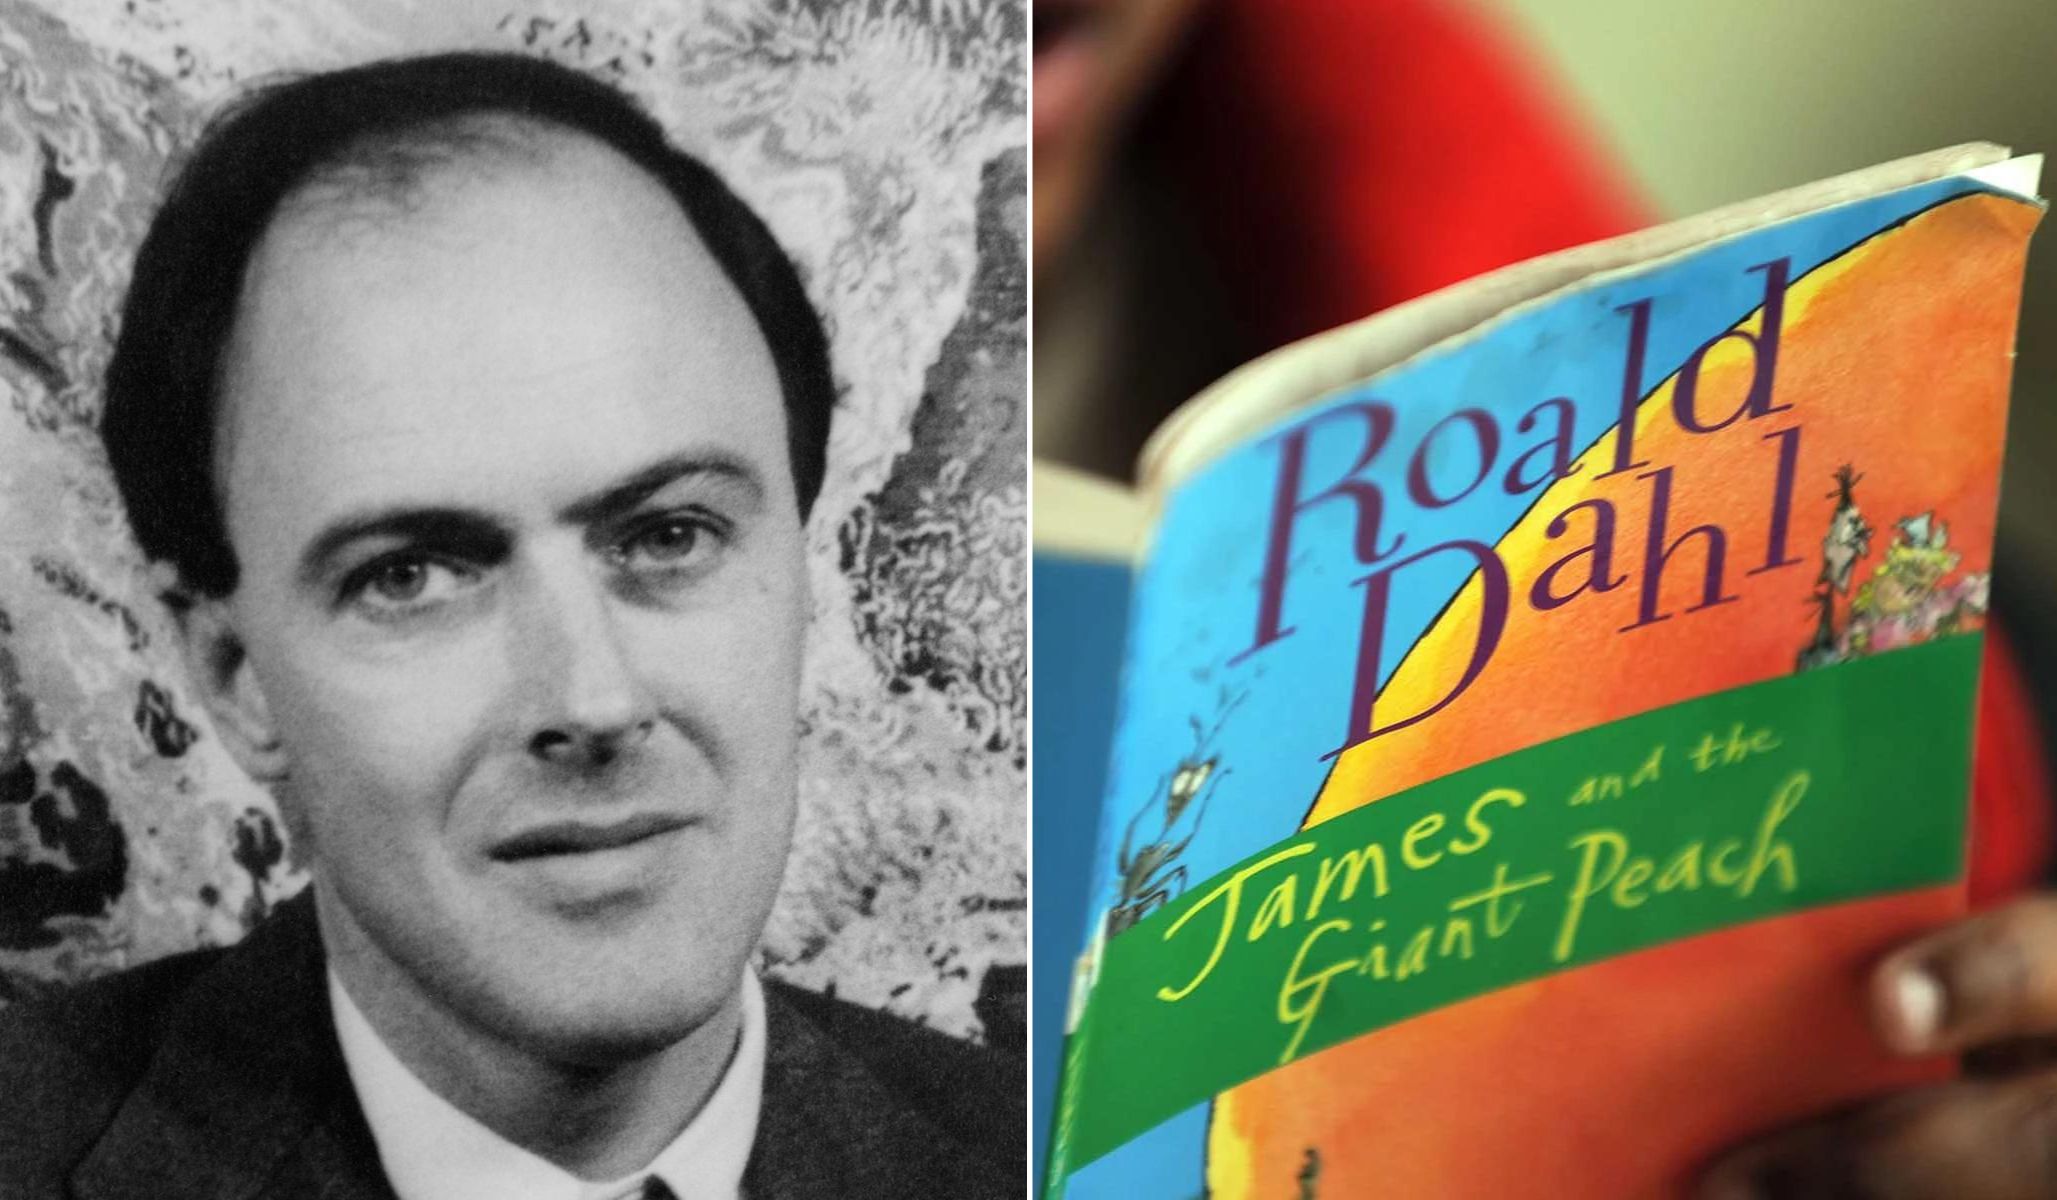 Why Should Roald Dahl’s Grandchildren Tell Us What We’re Allowed to Read? | National Review